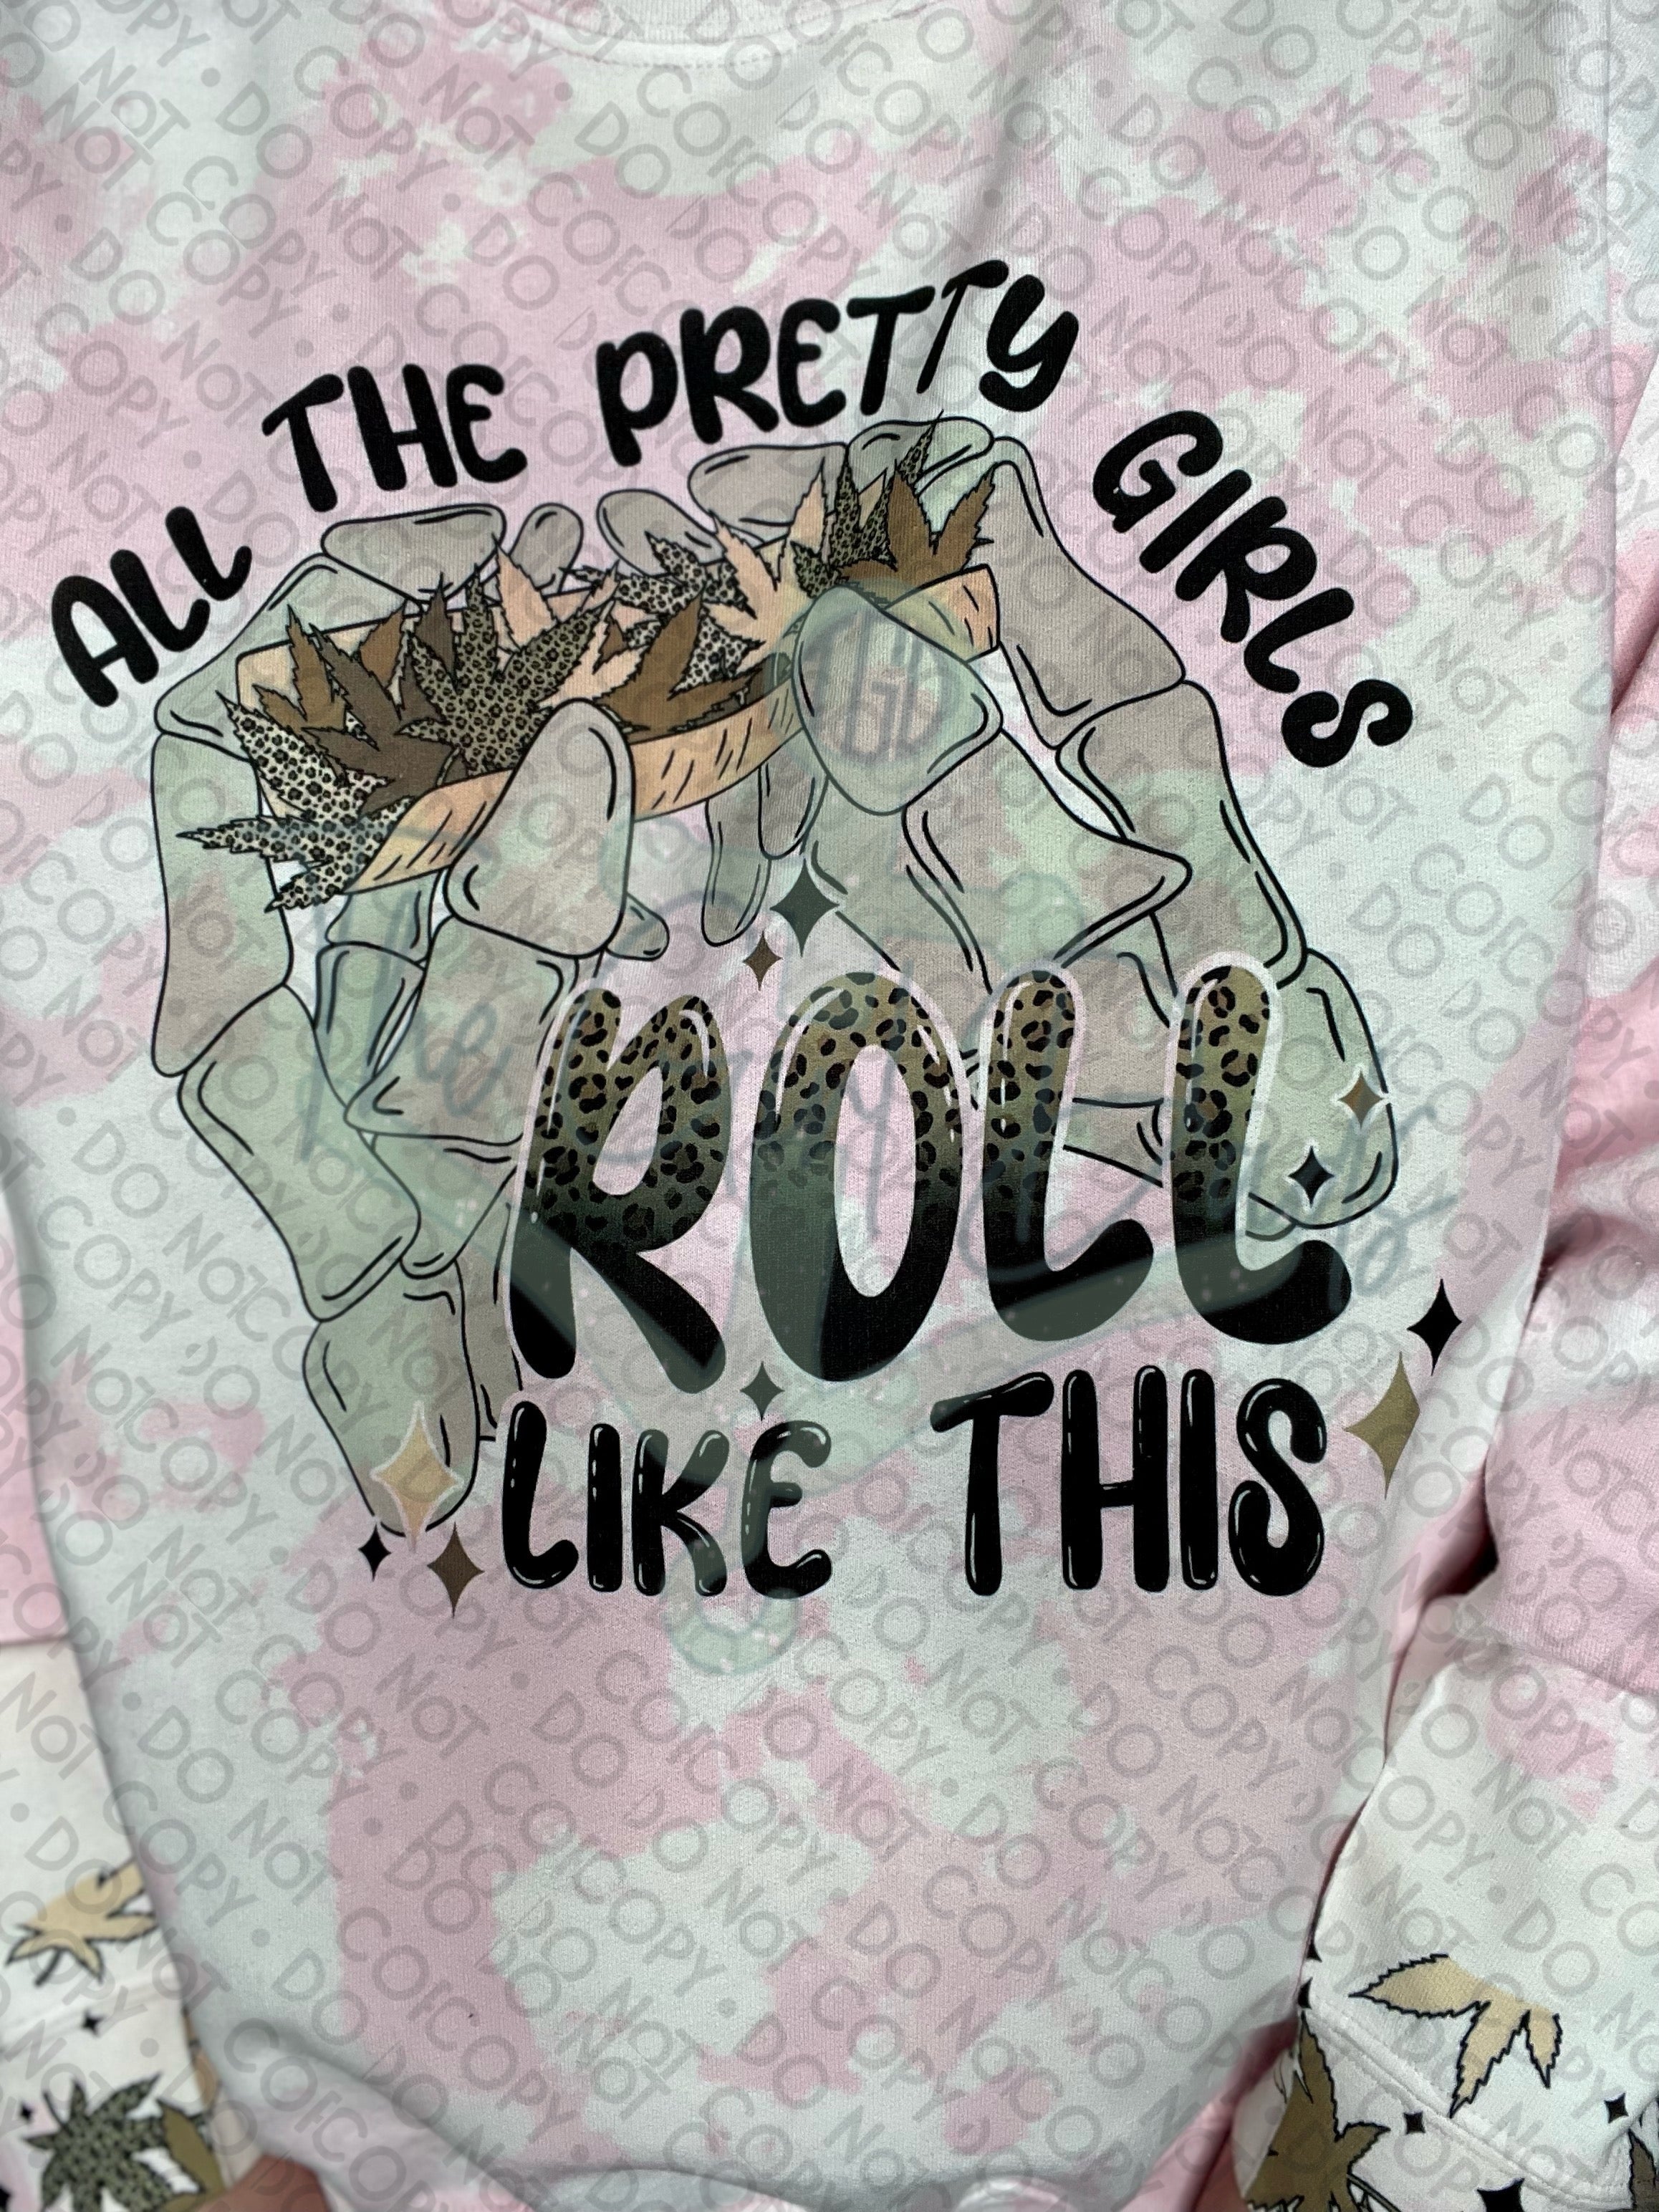 All The Pretty Girls Roll Like This Top Design